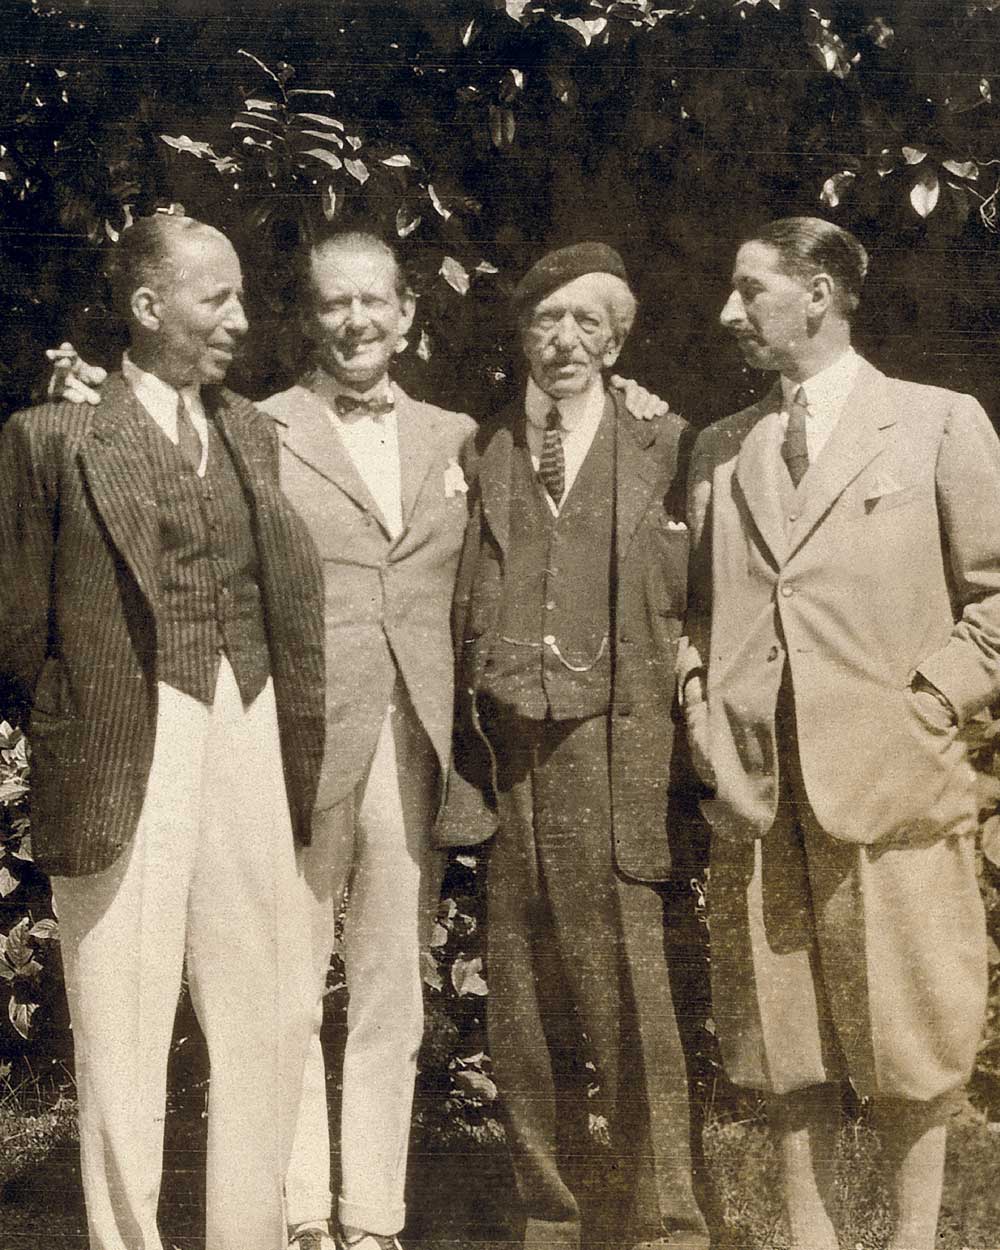 Alfred and his three sons 1922 (image: Cartier)